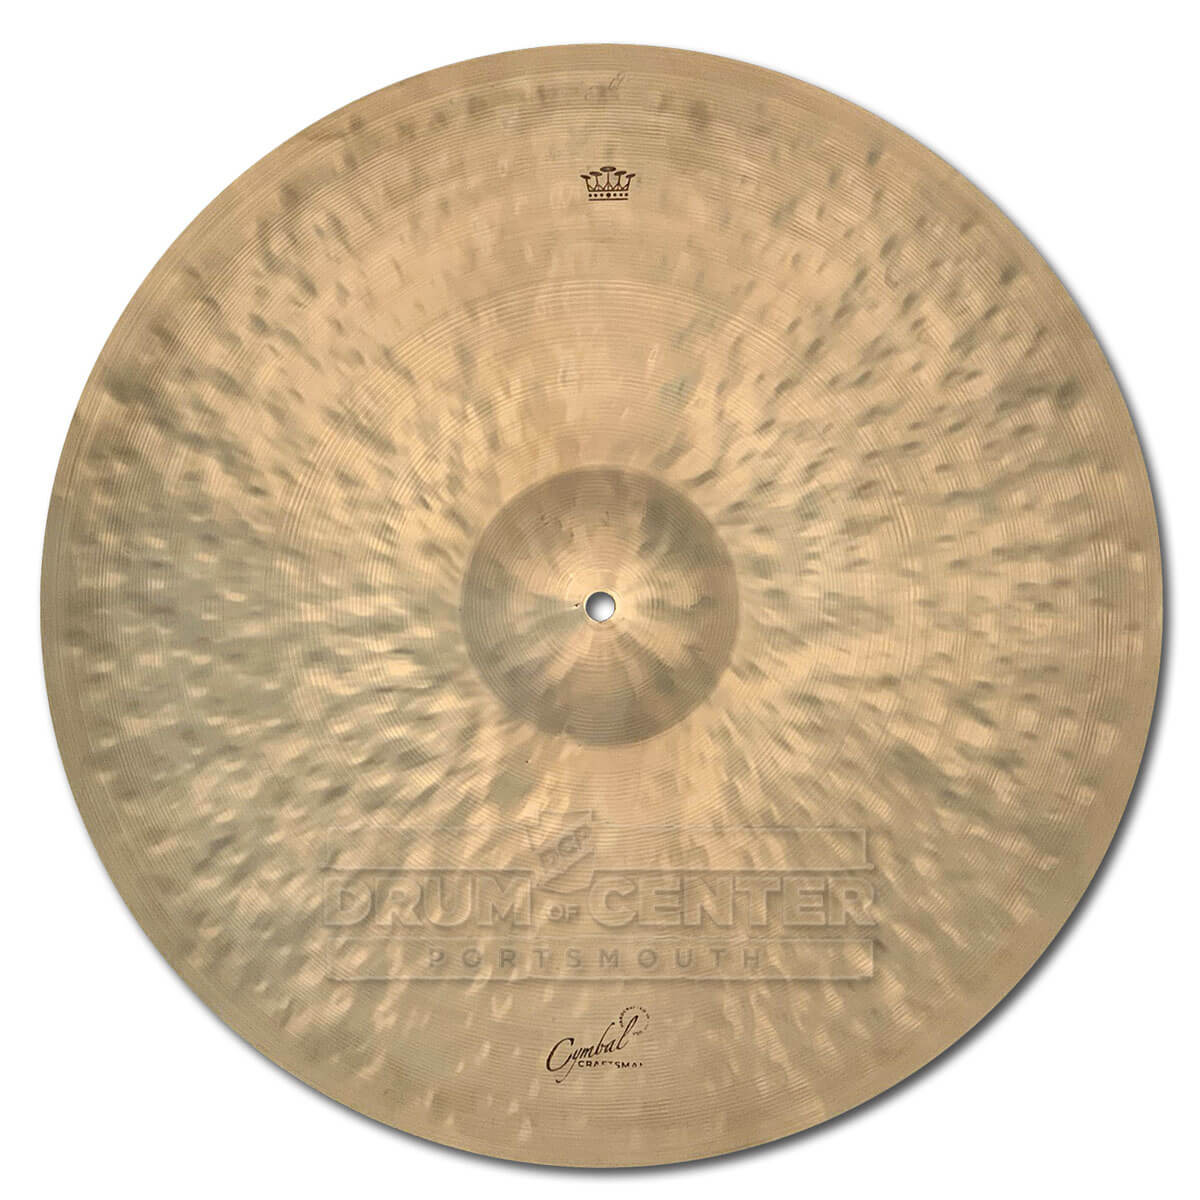 Royal Cymbals Cymbal Craftsman EAK Style Ride Cymbal 20" 2145 grams - Drum Center Of Portsmouth